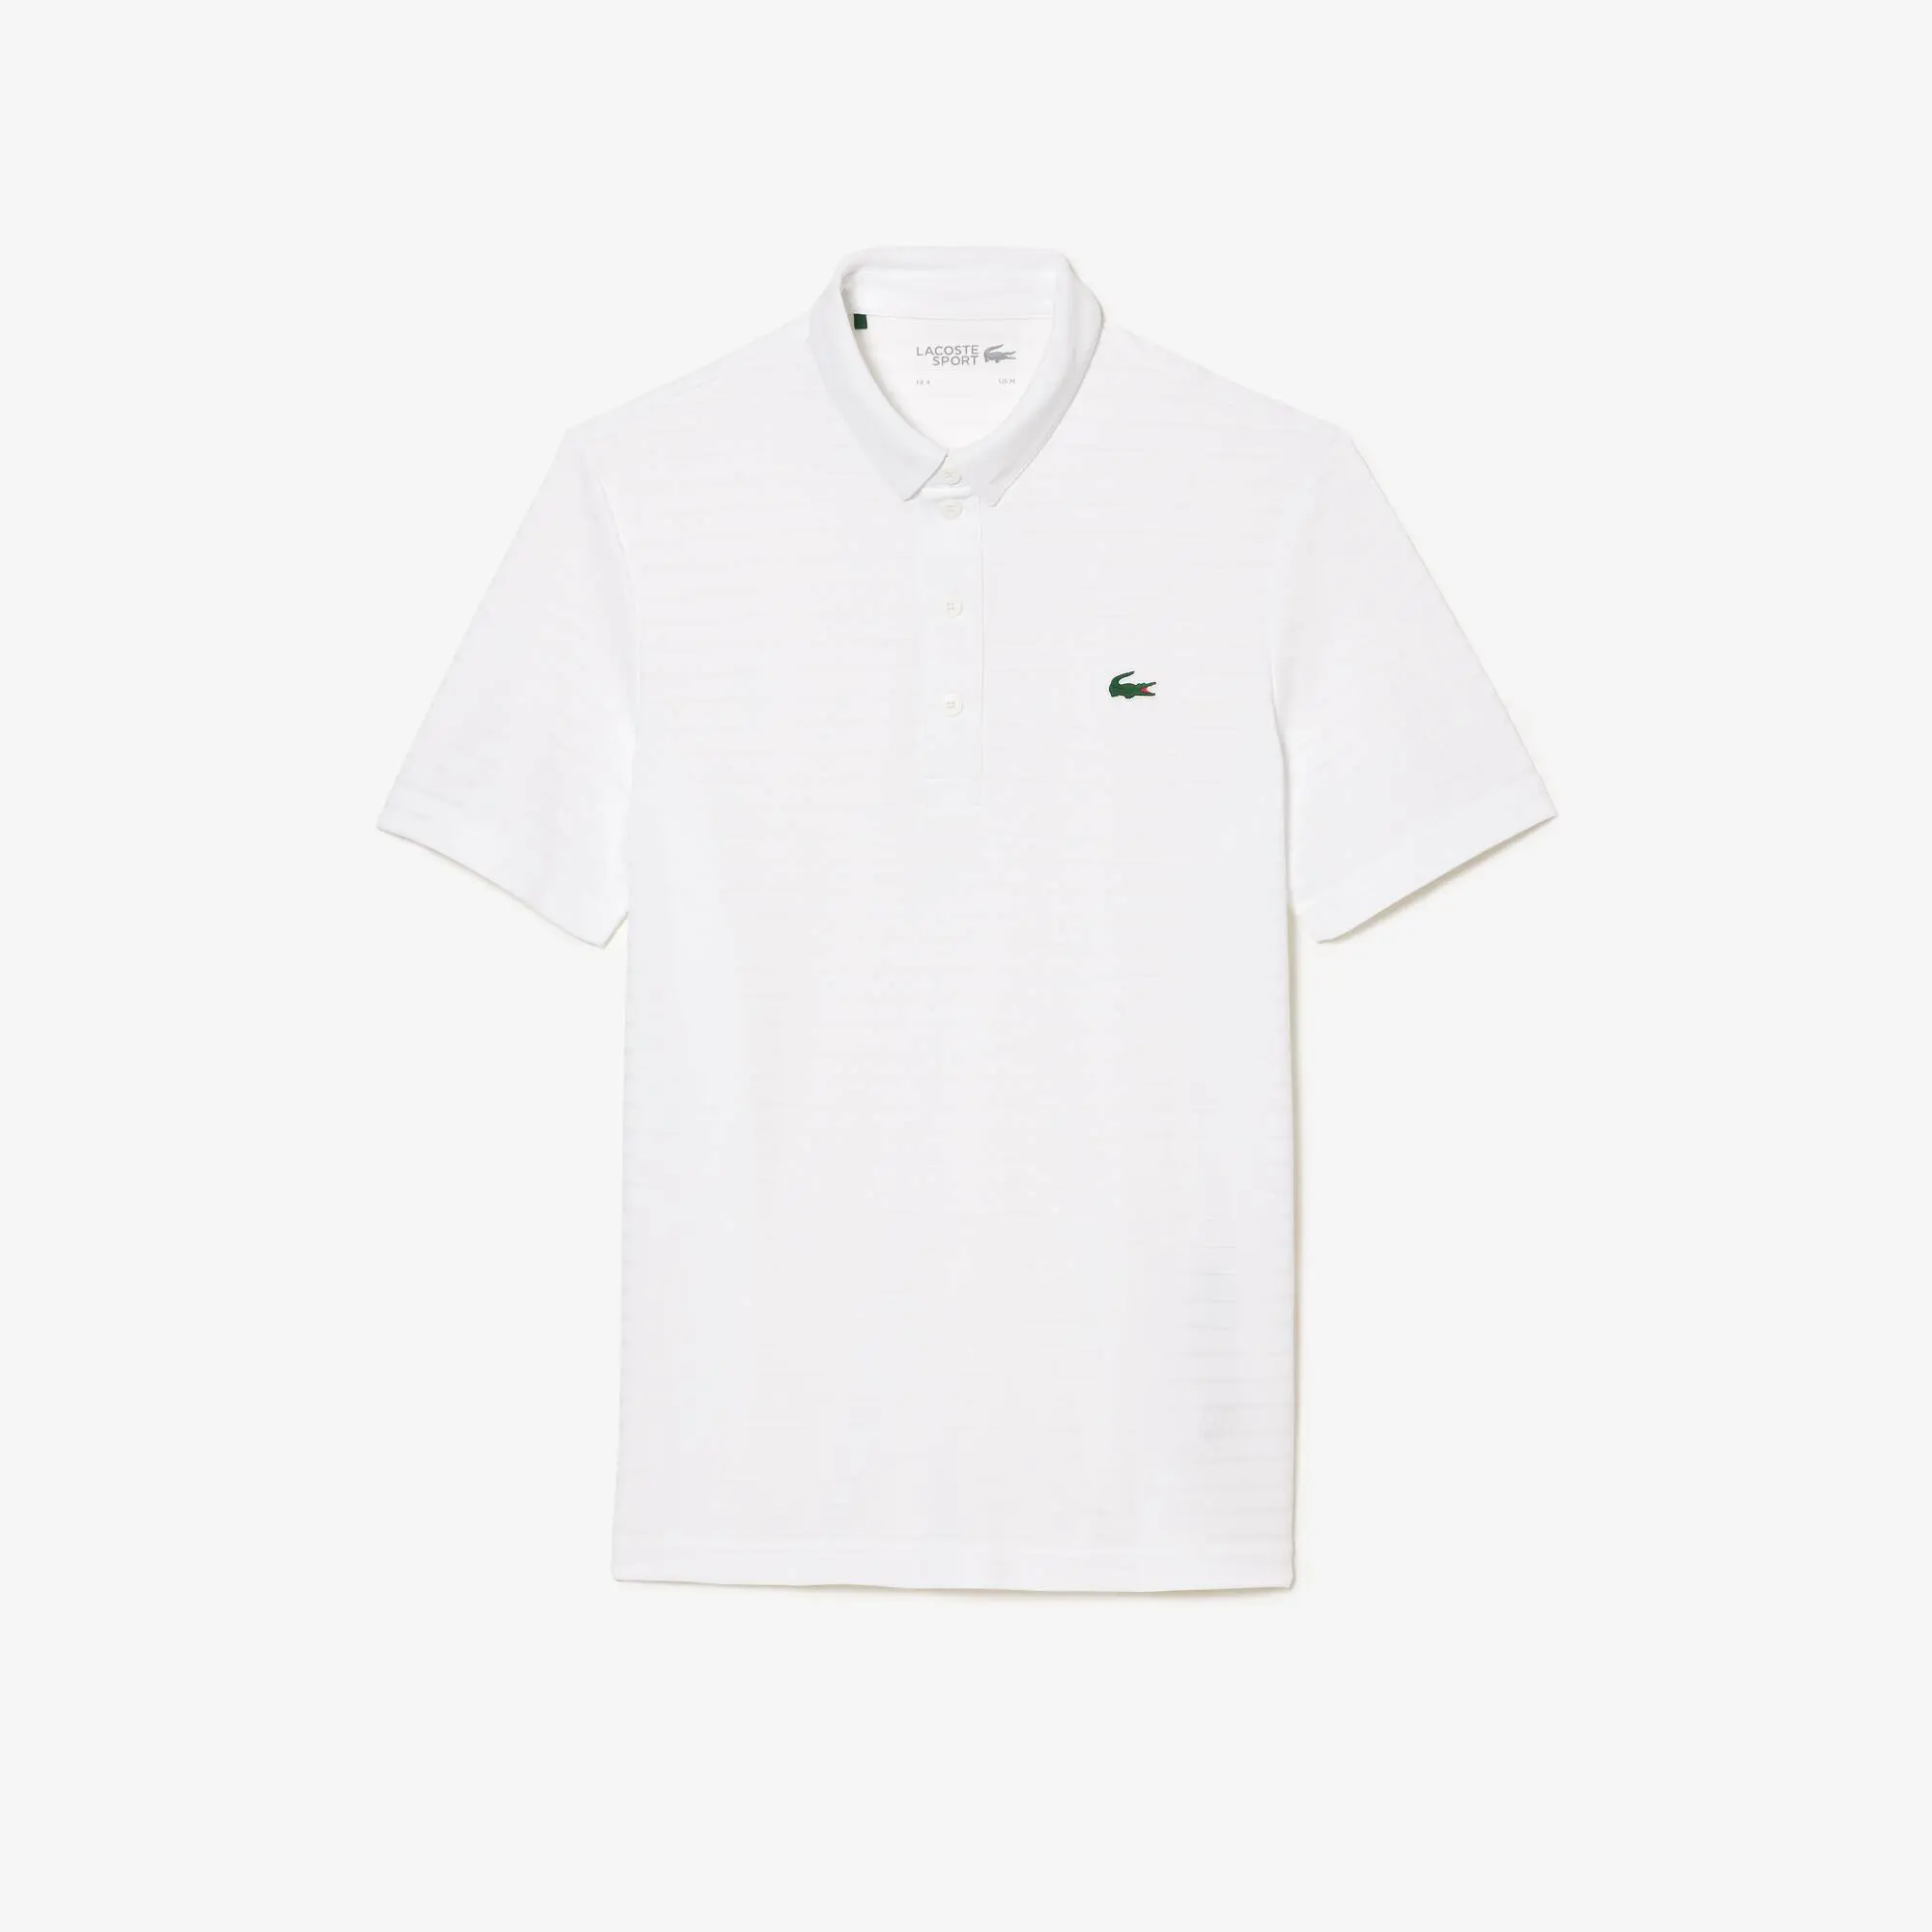 Lacoste Men's Lacoste SPORT Textured Breathable Golf Polo Shirt. 2